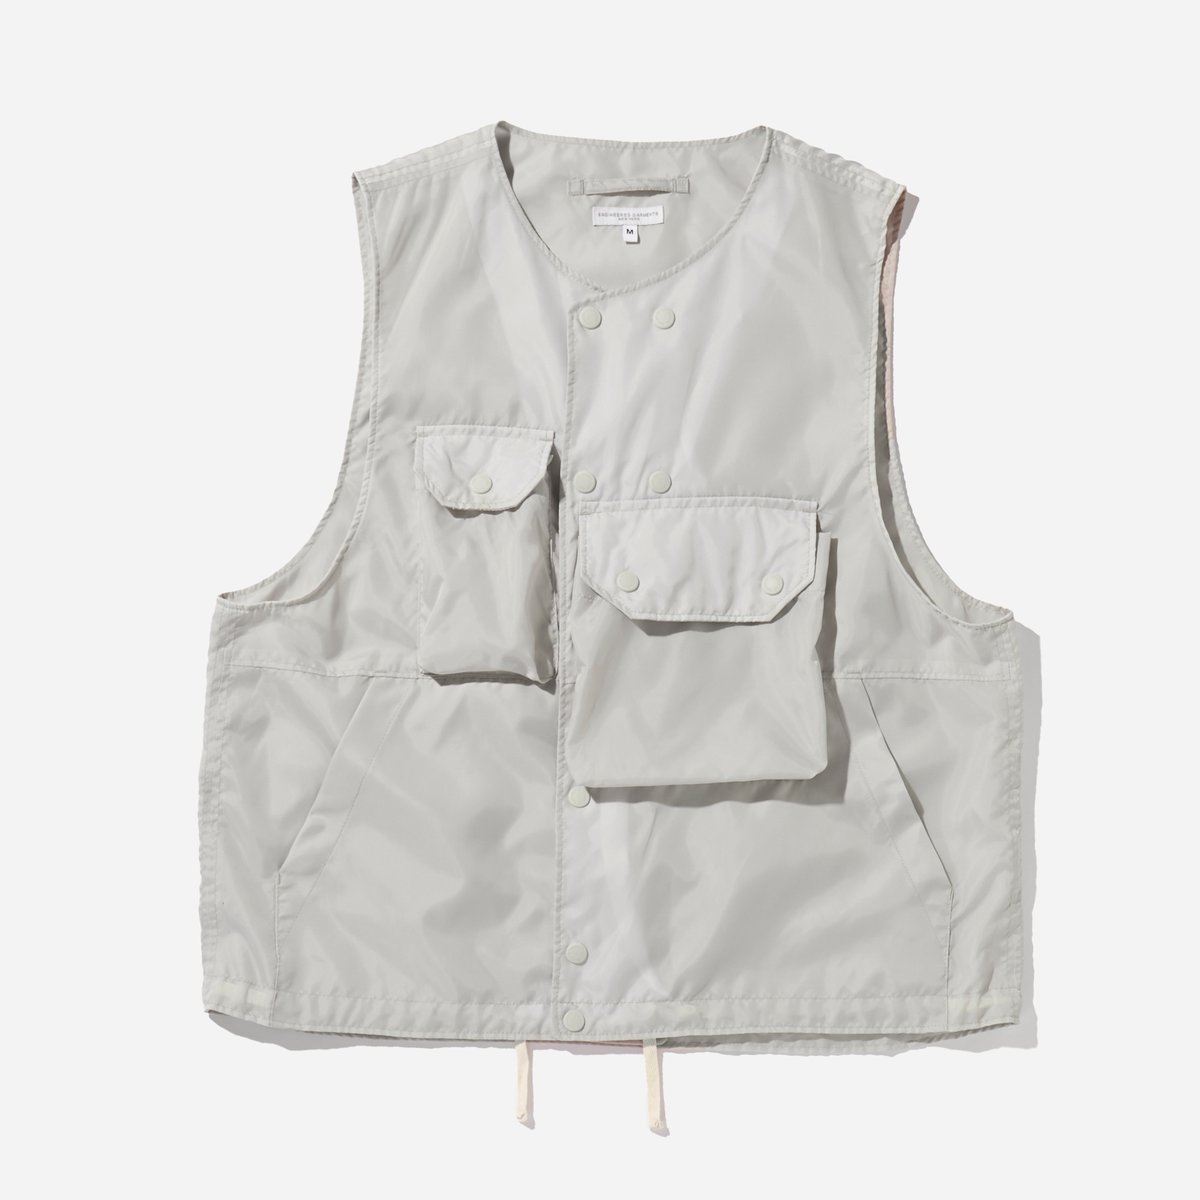 Daiki Suzuki's Engineered Garments label presents the Polyester Taffeta Cover Vest for SS22, which is a unique functional silhouette ideal for layering up throughout the season. bit.ly/3HsSFlW #HIP #EngineeredGarments